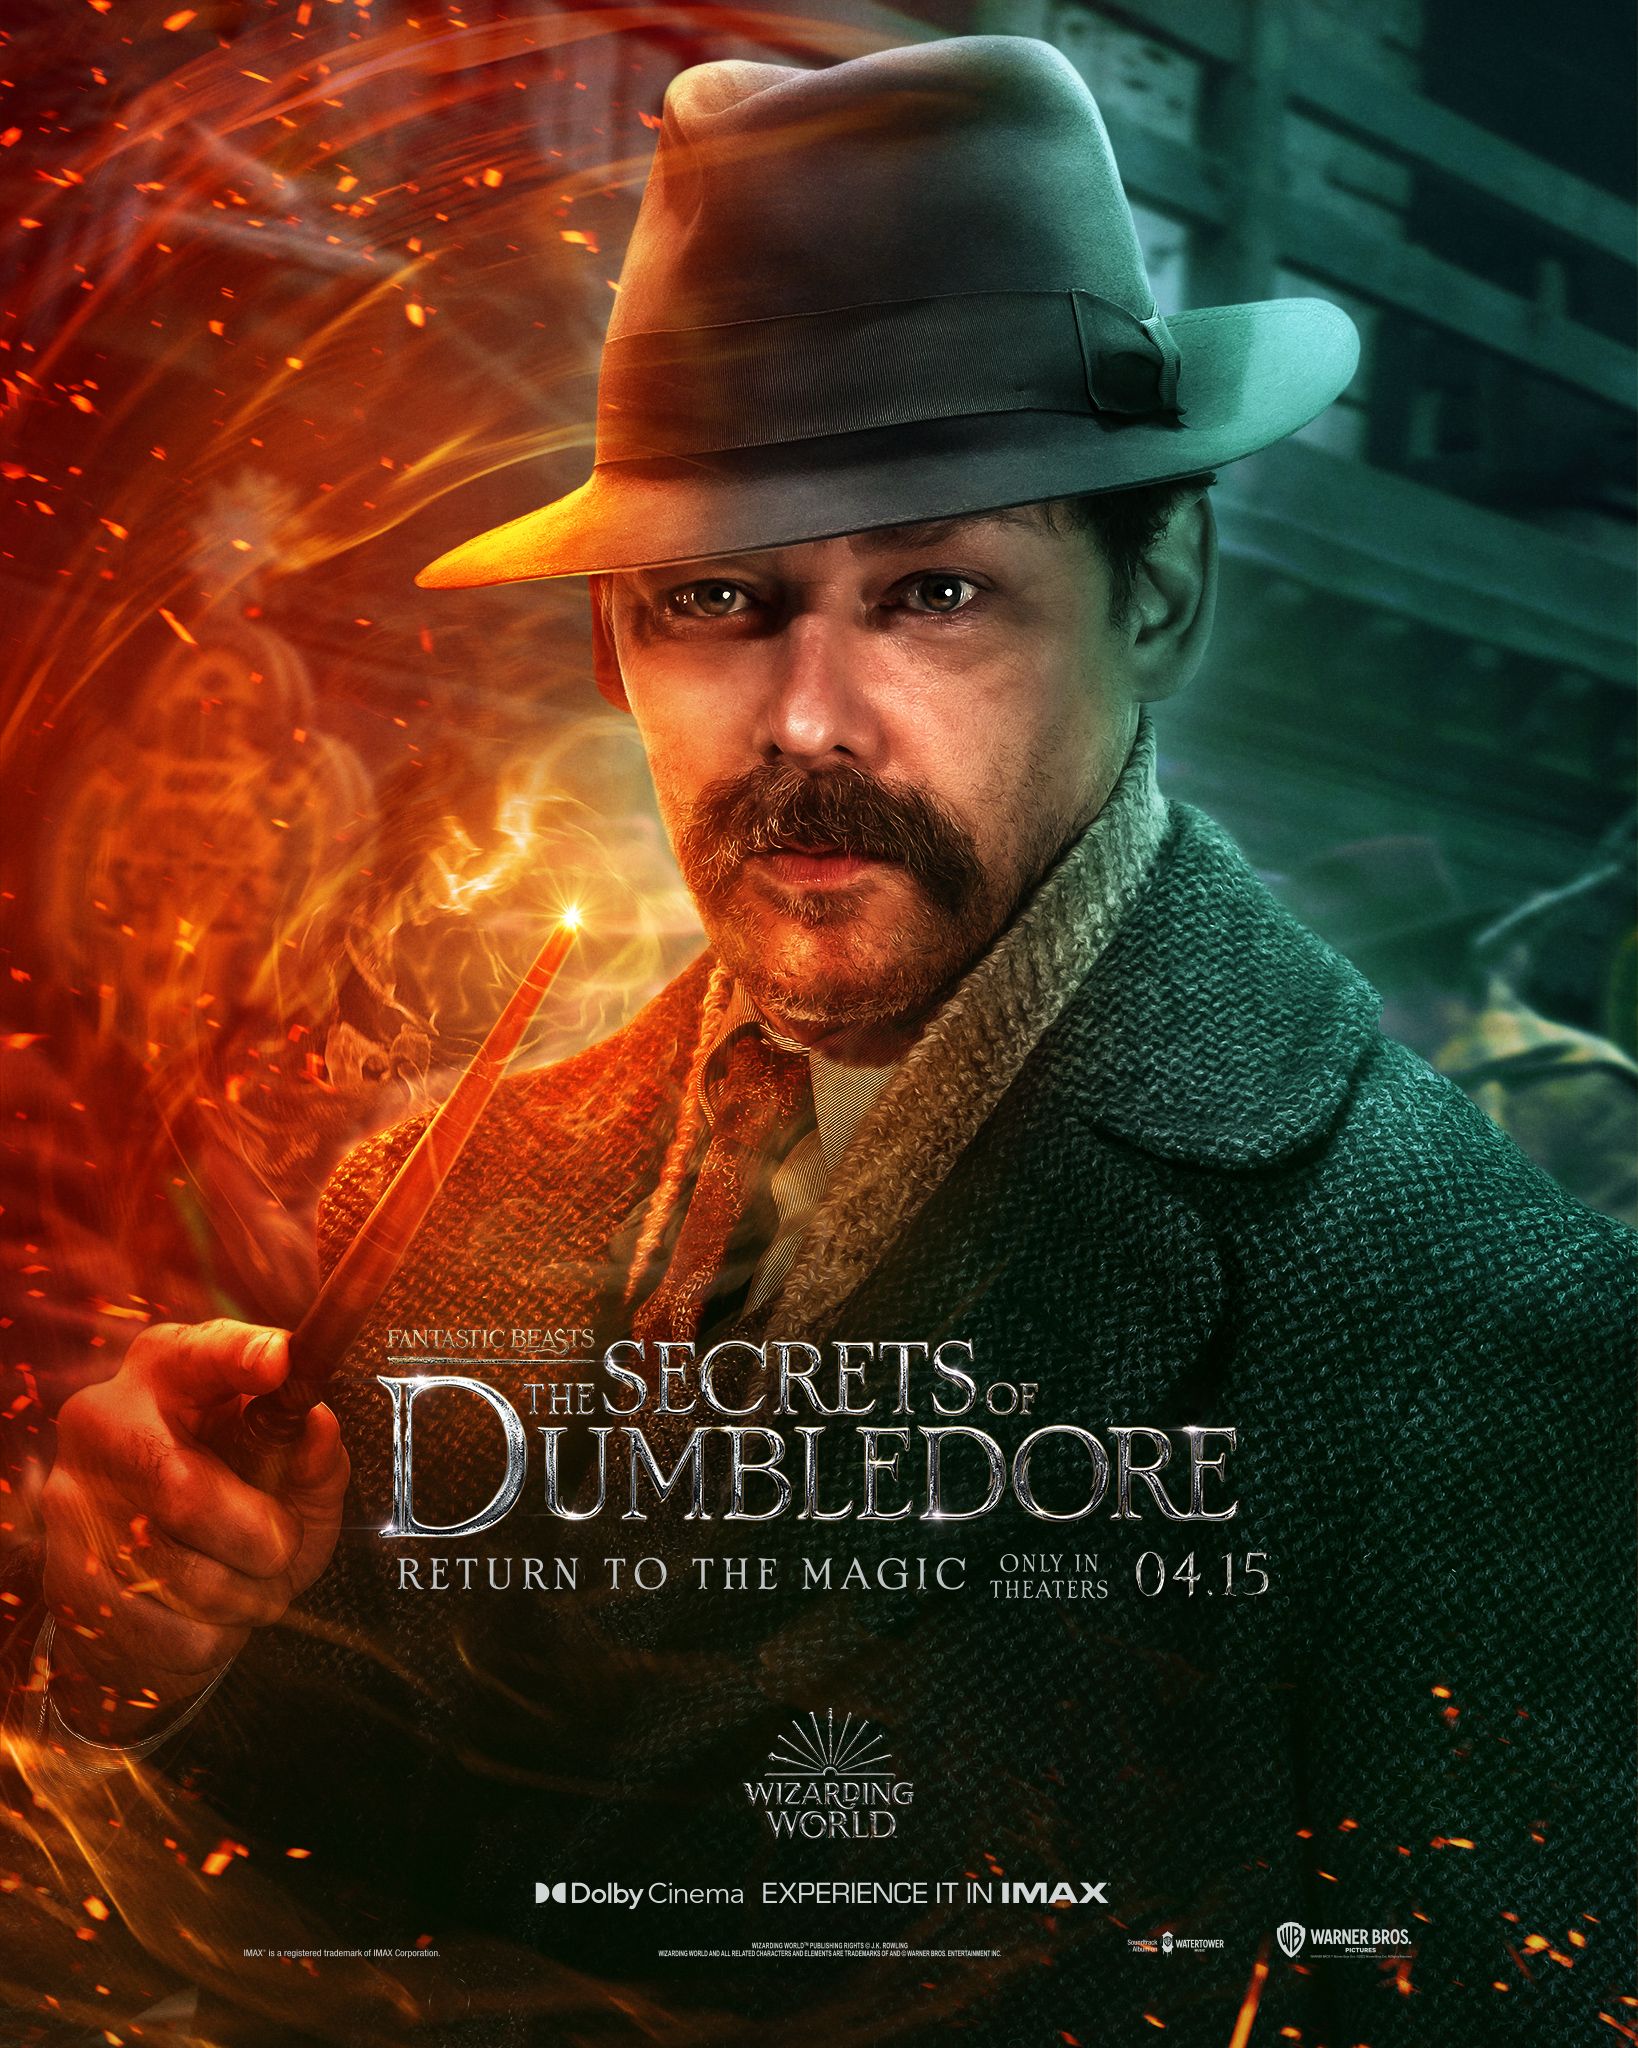 fantastic beasts character posters richard coyle